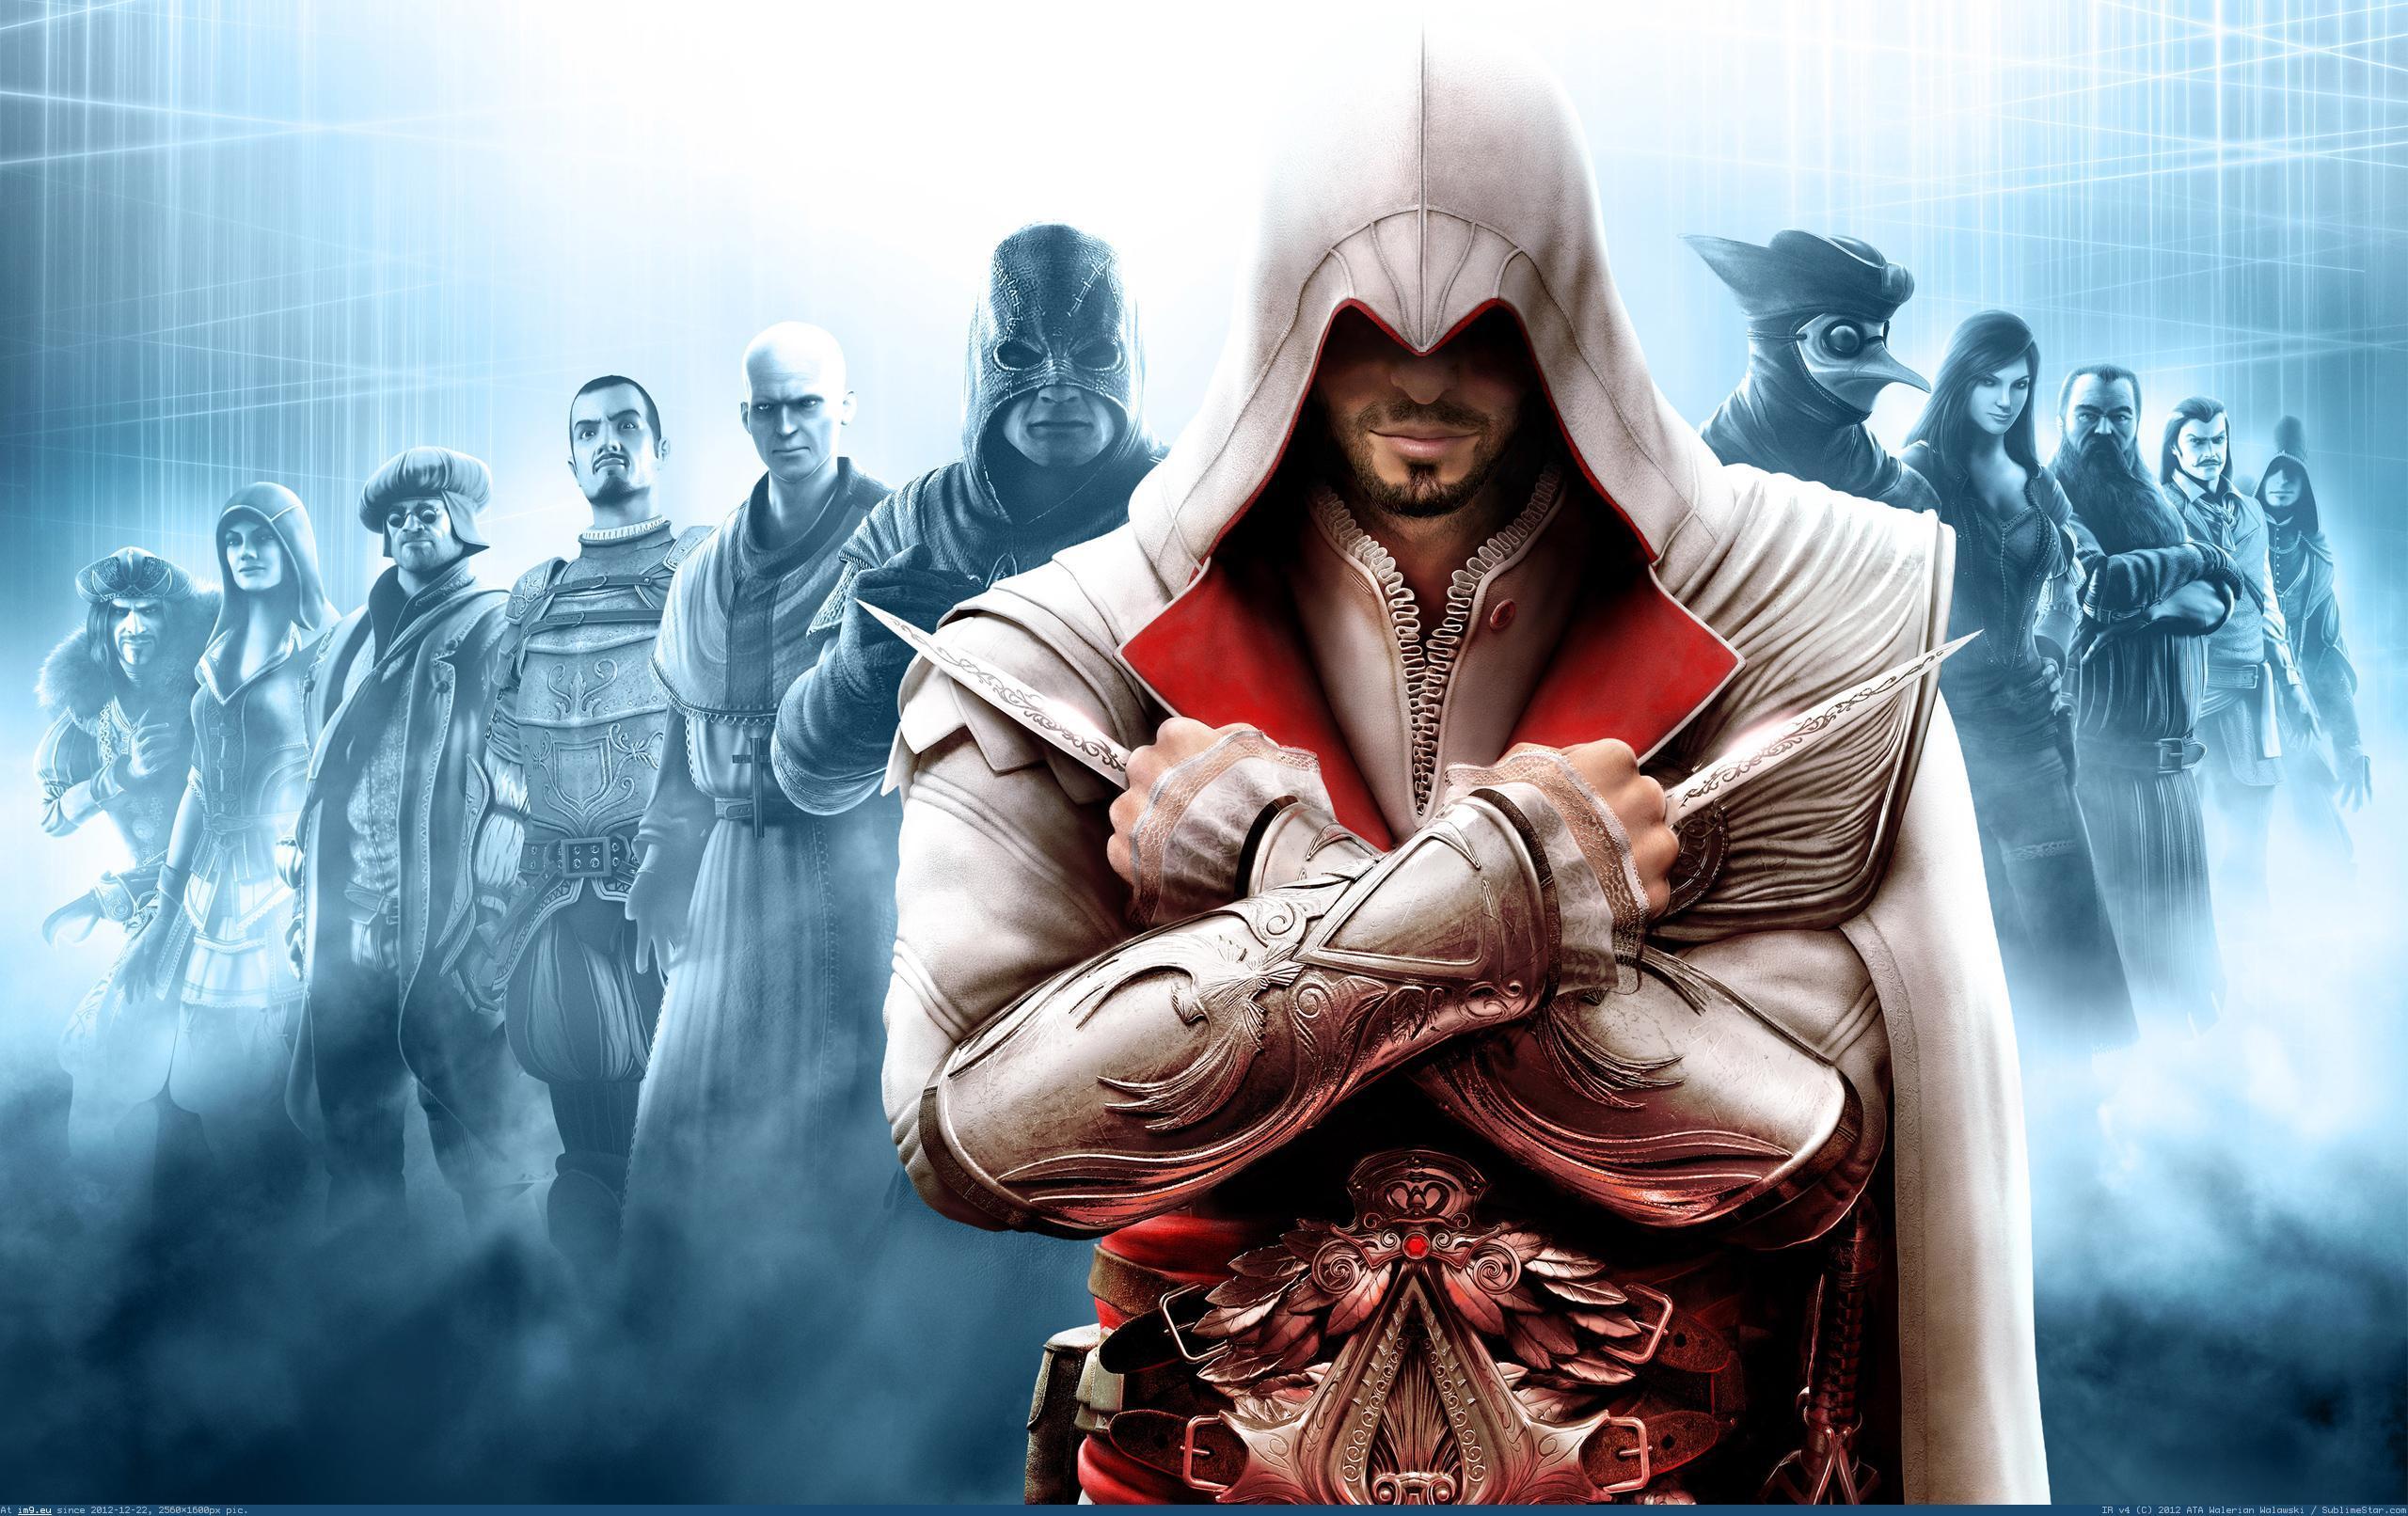 Download Assassin&;s Creed 3 Wallpaper For Windows 7 (5801) Full